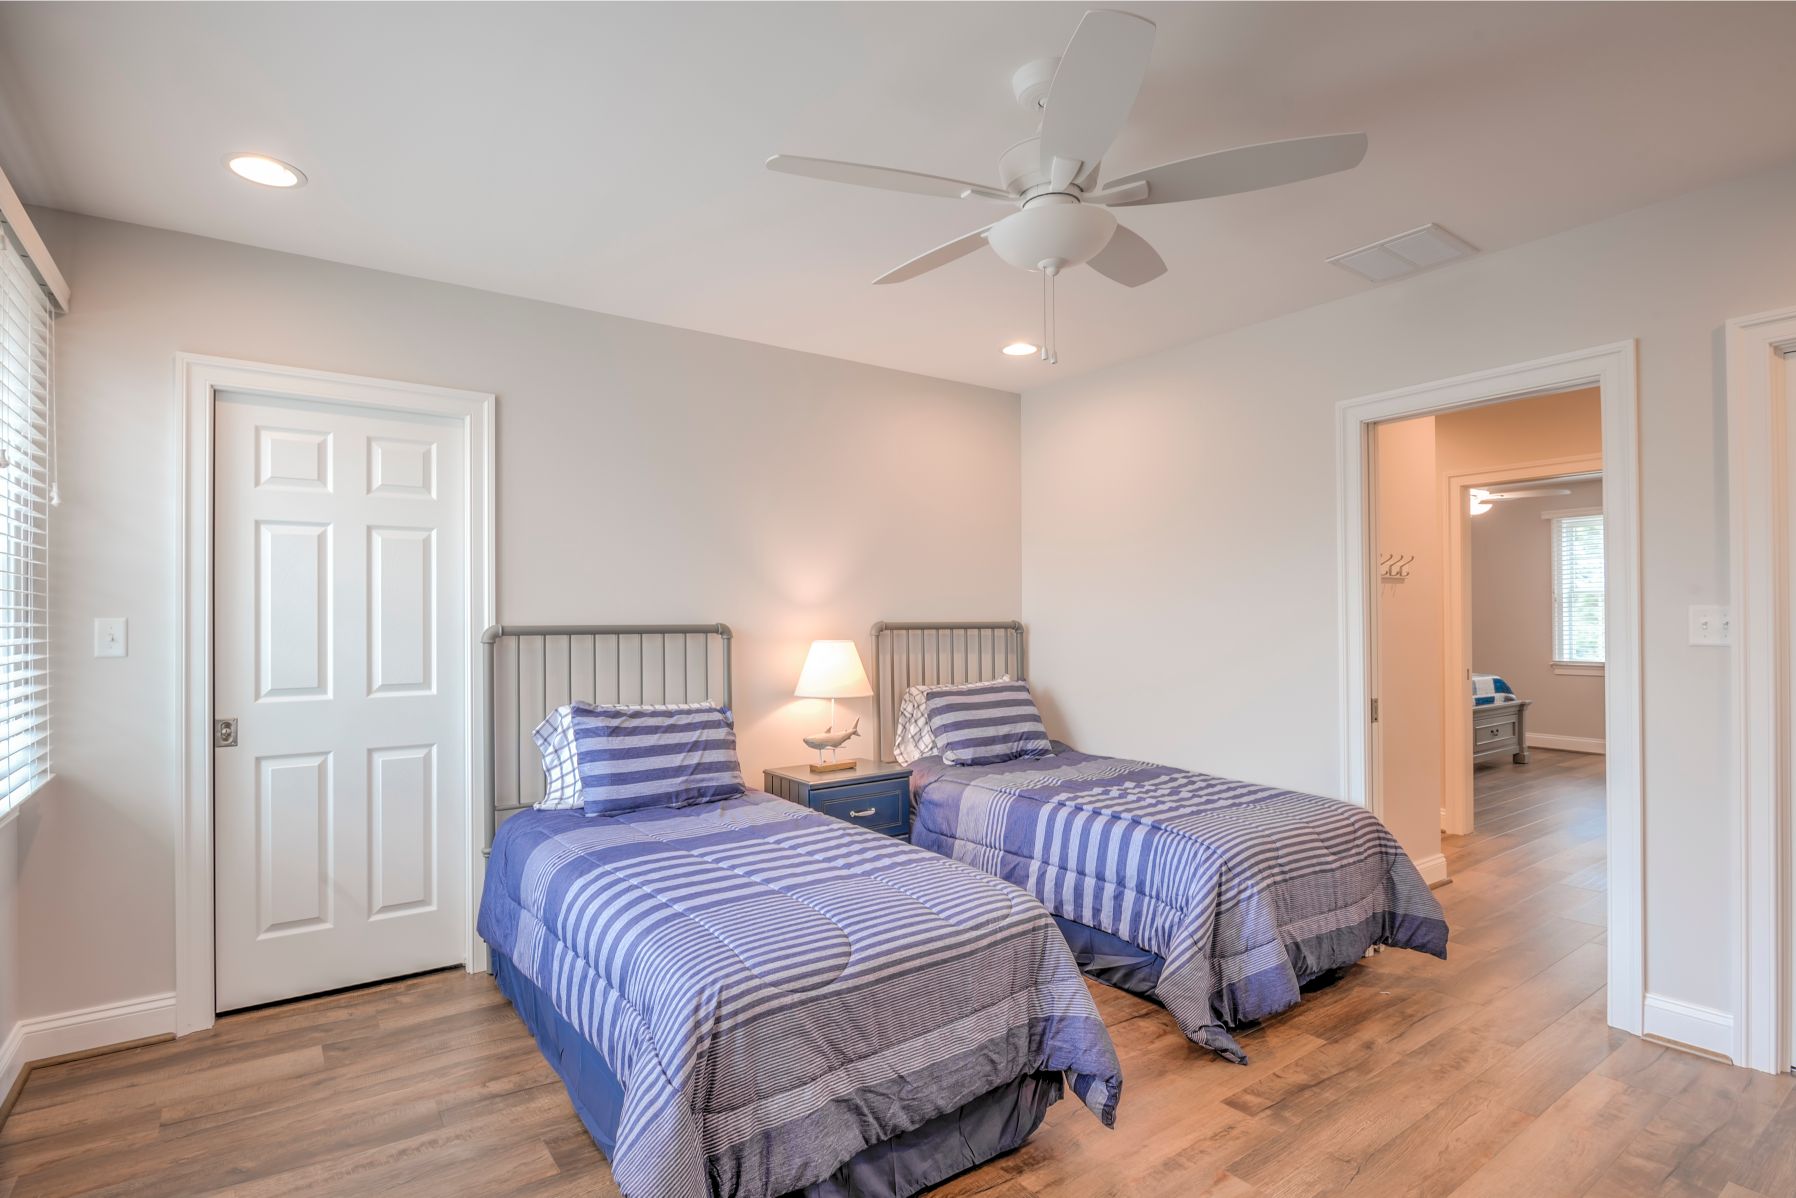 New Addition in October Glory, Ocean View DE - Guest Bedroom with White Ceiling Fan and Farmland Hickory Flooring